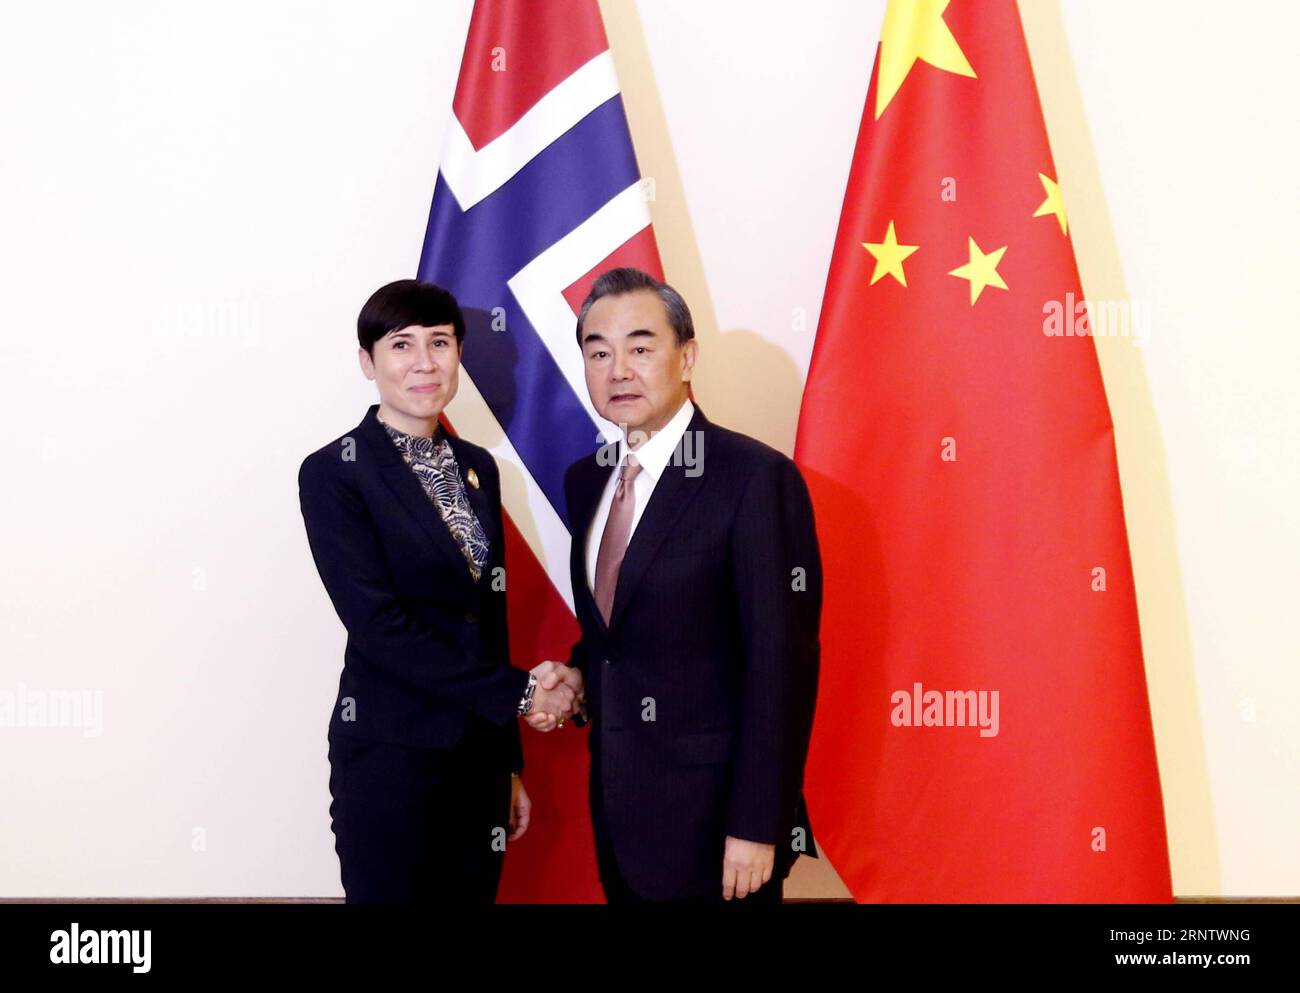 (171120) -- NAY PYI TAW, Nov. 20, 2017 -- Chinese Foreign Minister Wang Yi (R) shakes hands with Norwegian Minister of Foreign Affairs Ine Eriksen Soreide on the sidelines of the 13th Asia-Europe Meeting (ASEM) foreign ministers meeting in Nay Pyi Taw, Myanmar, on Nov. 20, 2017. ) MYANMAR-NAY PYI TAW-ASEM FMM 13 UxAung PUBLICATIONxNOTxINxCHN Stock Photo